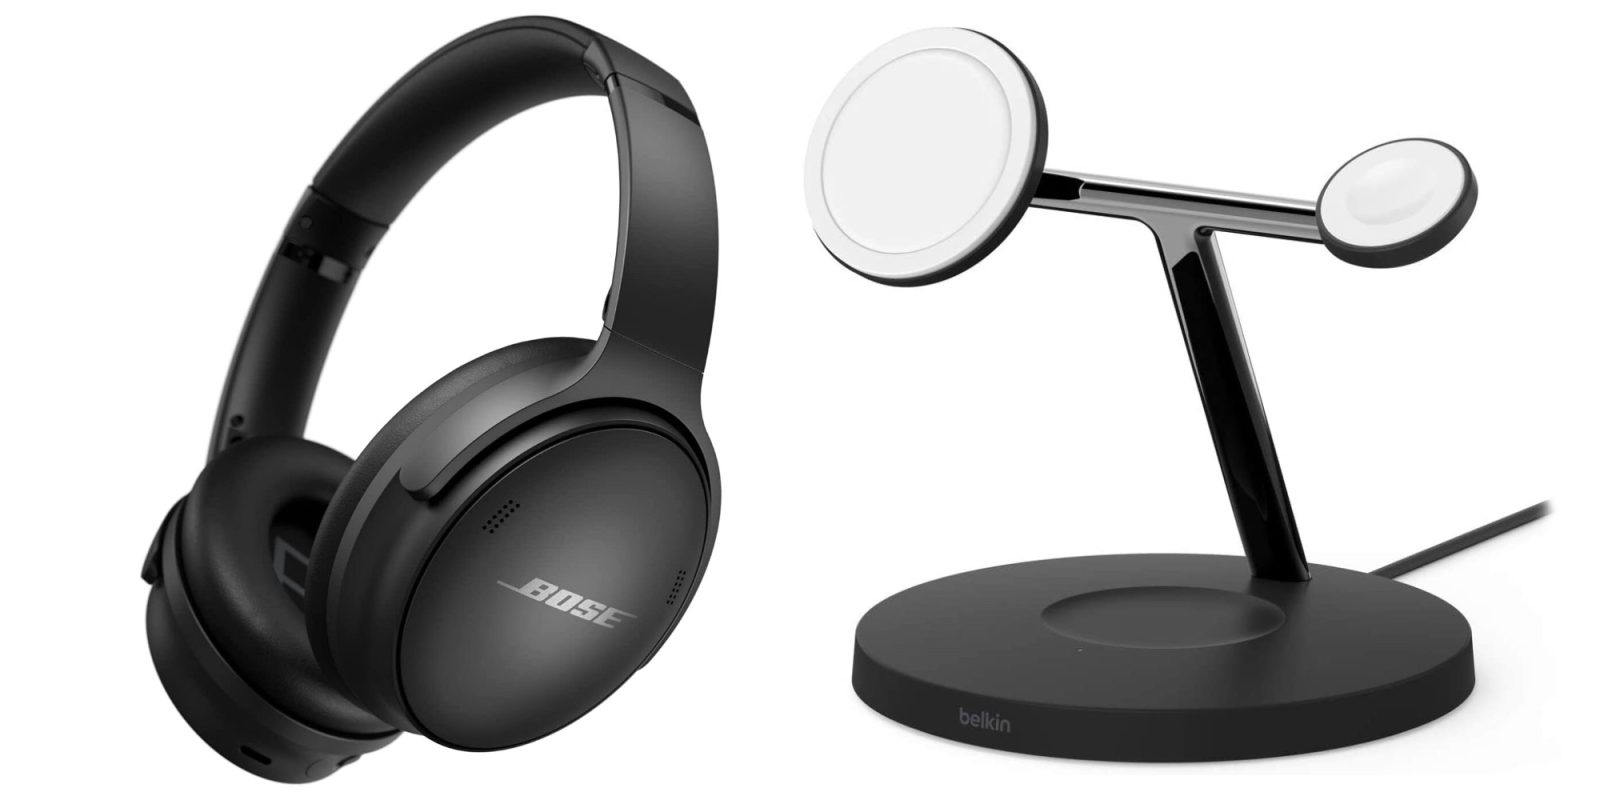 https://9to5mac.com/wp-content/uploads/sites/6/2022/07/Bose-QuietComfort-45-more.jpg?quality=82&strip=all&w=1600